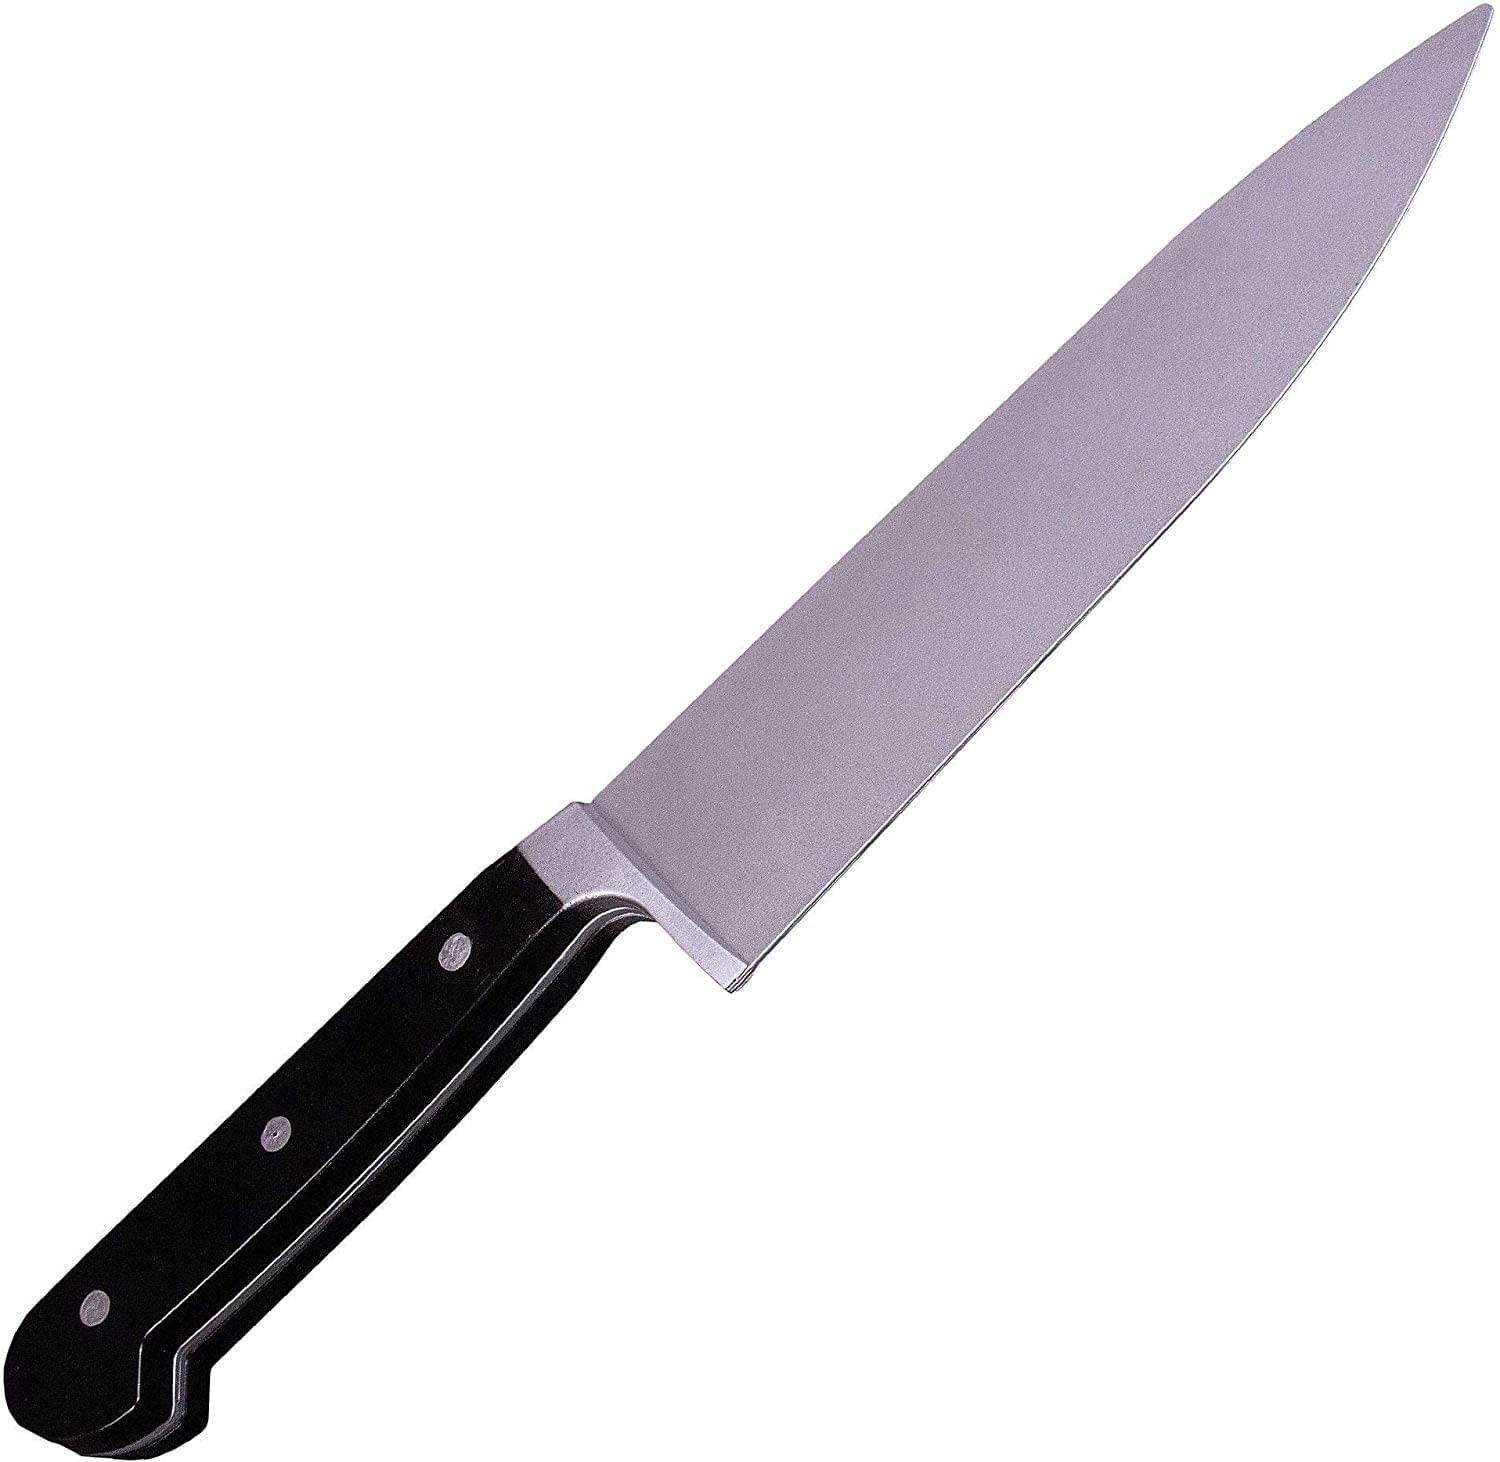 Halloween 2018 Michael Myers Kitchen Knife Costume Prop Weapon